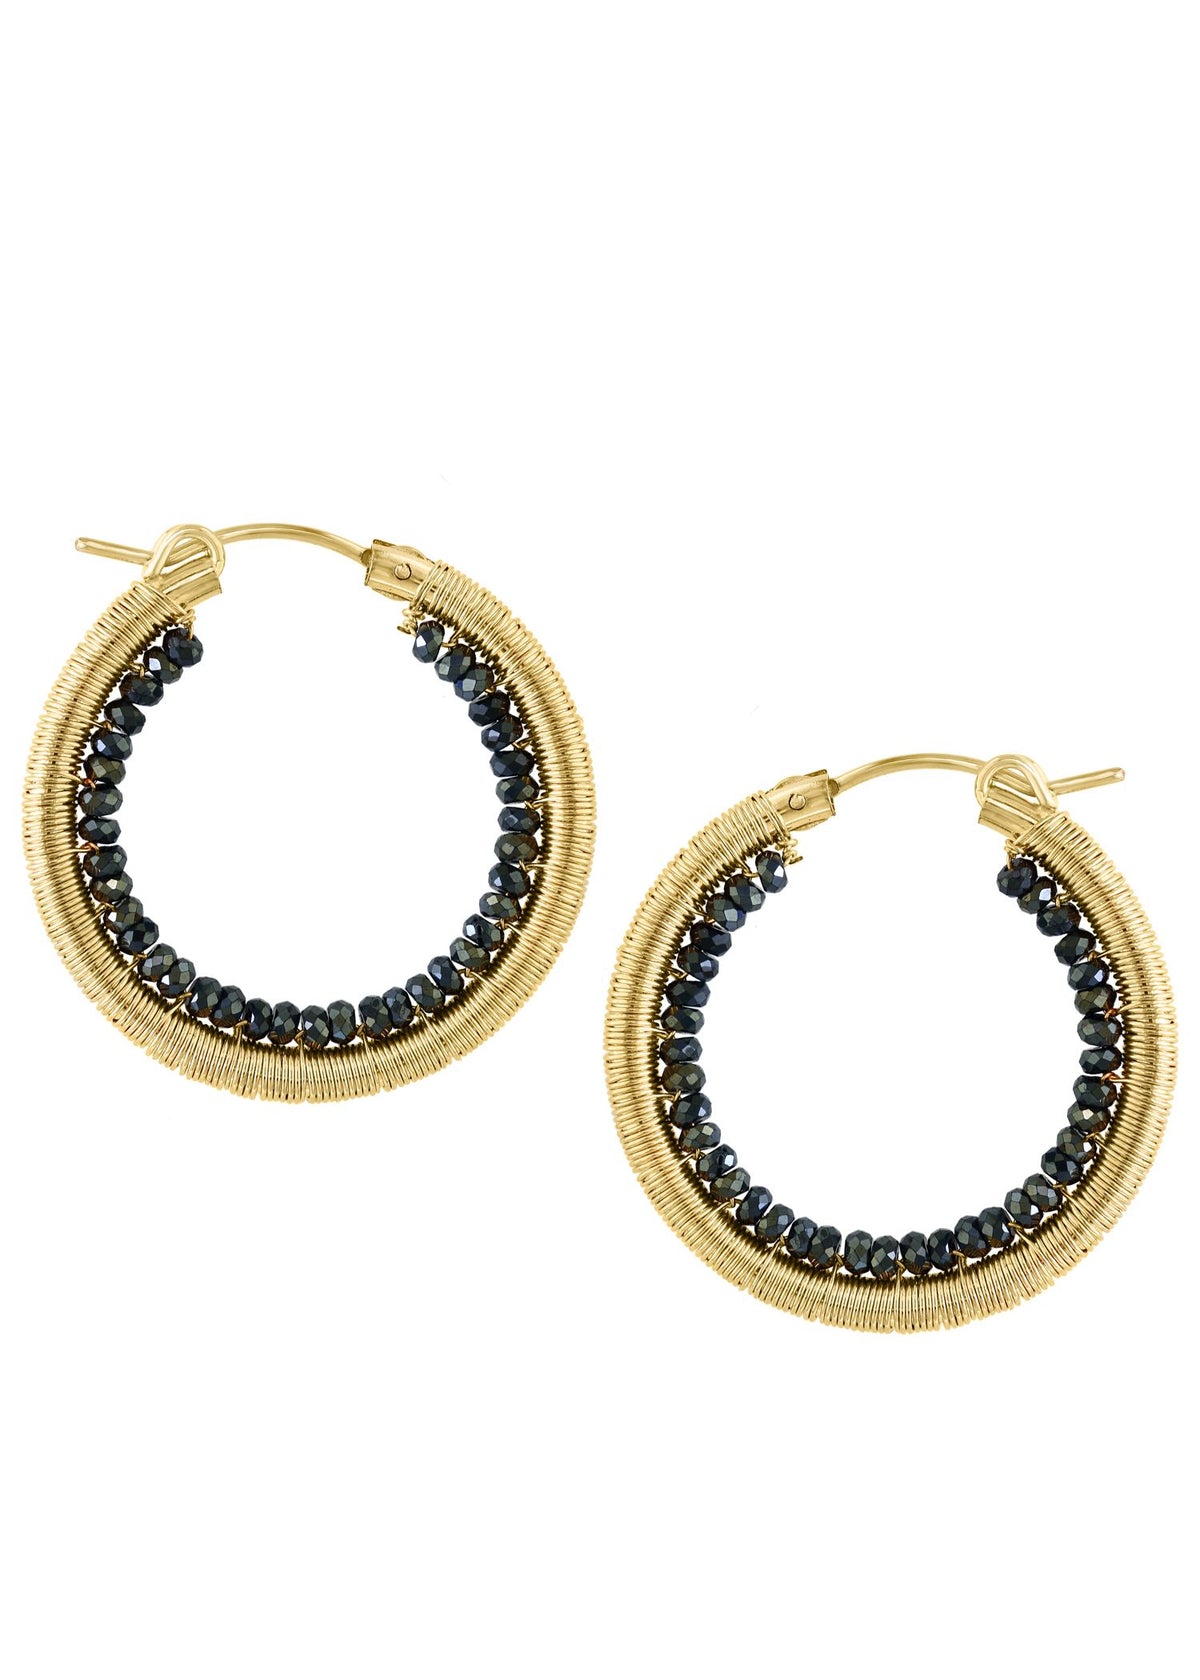 Black spinel 14k gold fill Earrings measure 1-1/8&quot;in length and 1-1/16&quot; in width Handmade in our Los Angeles studio